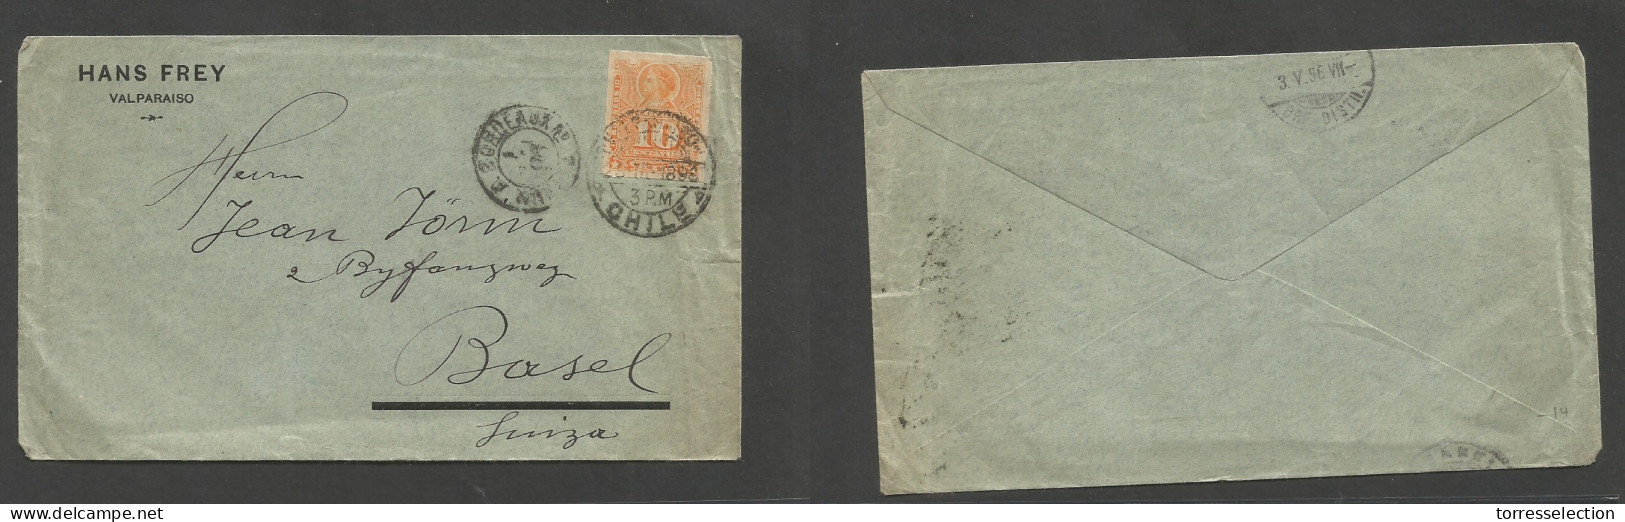 CHILE. 1898 (28 March) Valp - Switzerland, Basel (3 May) Fkd Comercial Env, 10c Orange, Tied Cds. Via France. XSALE. - Chile